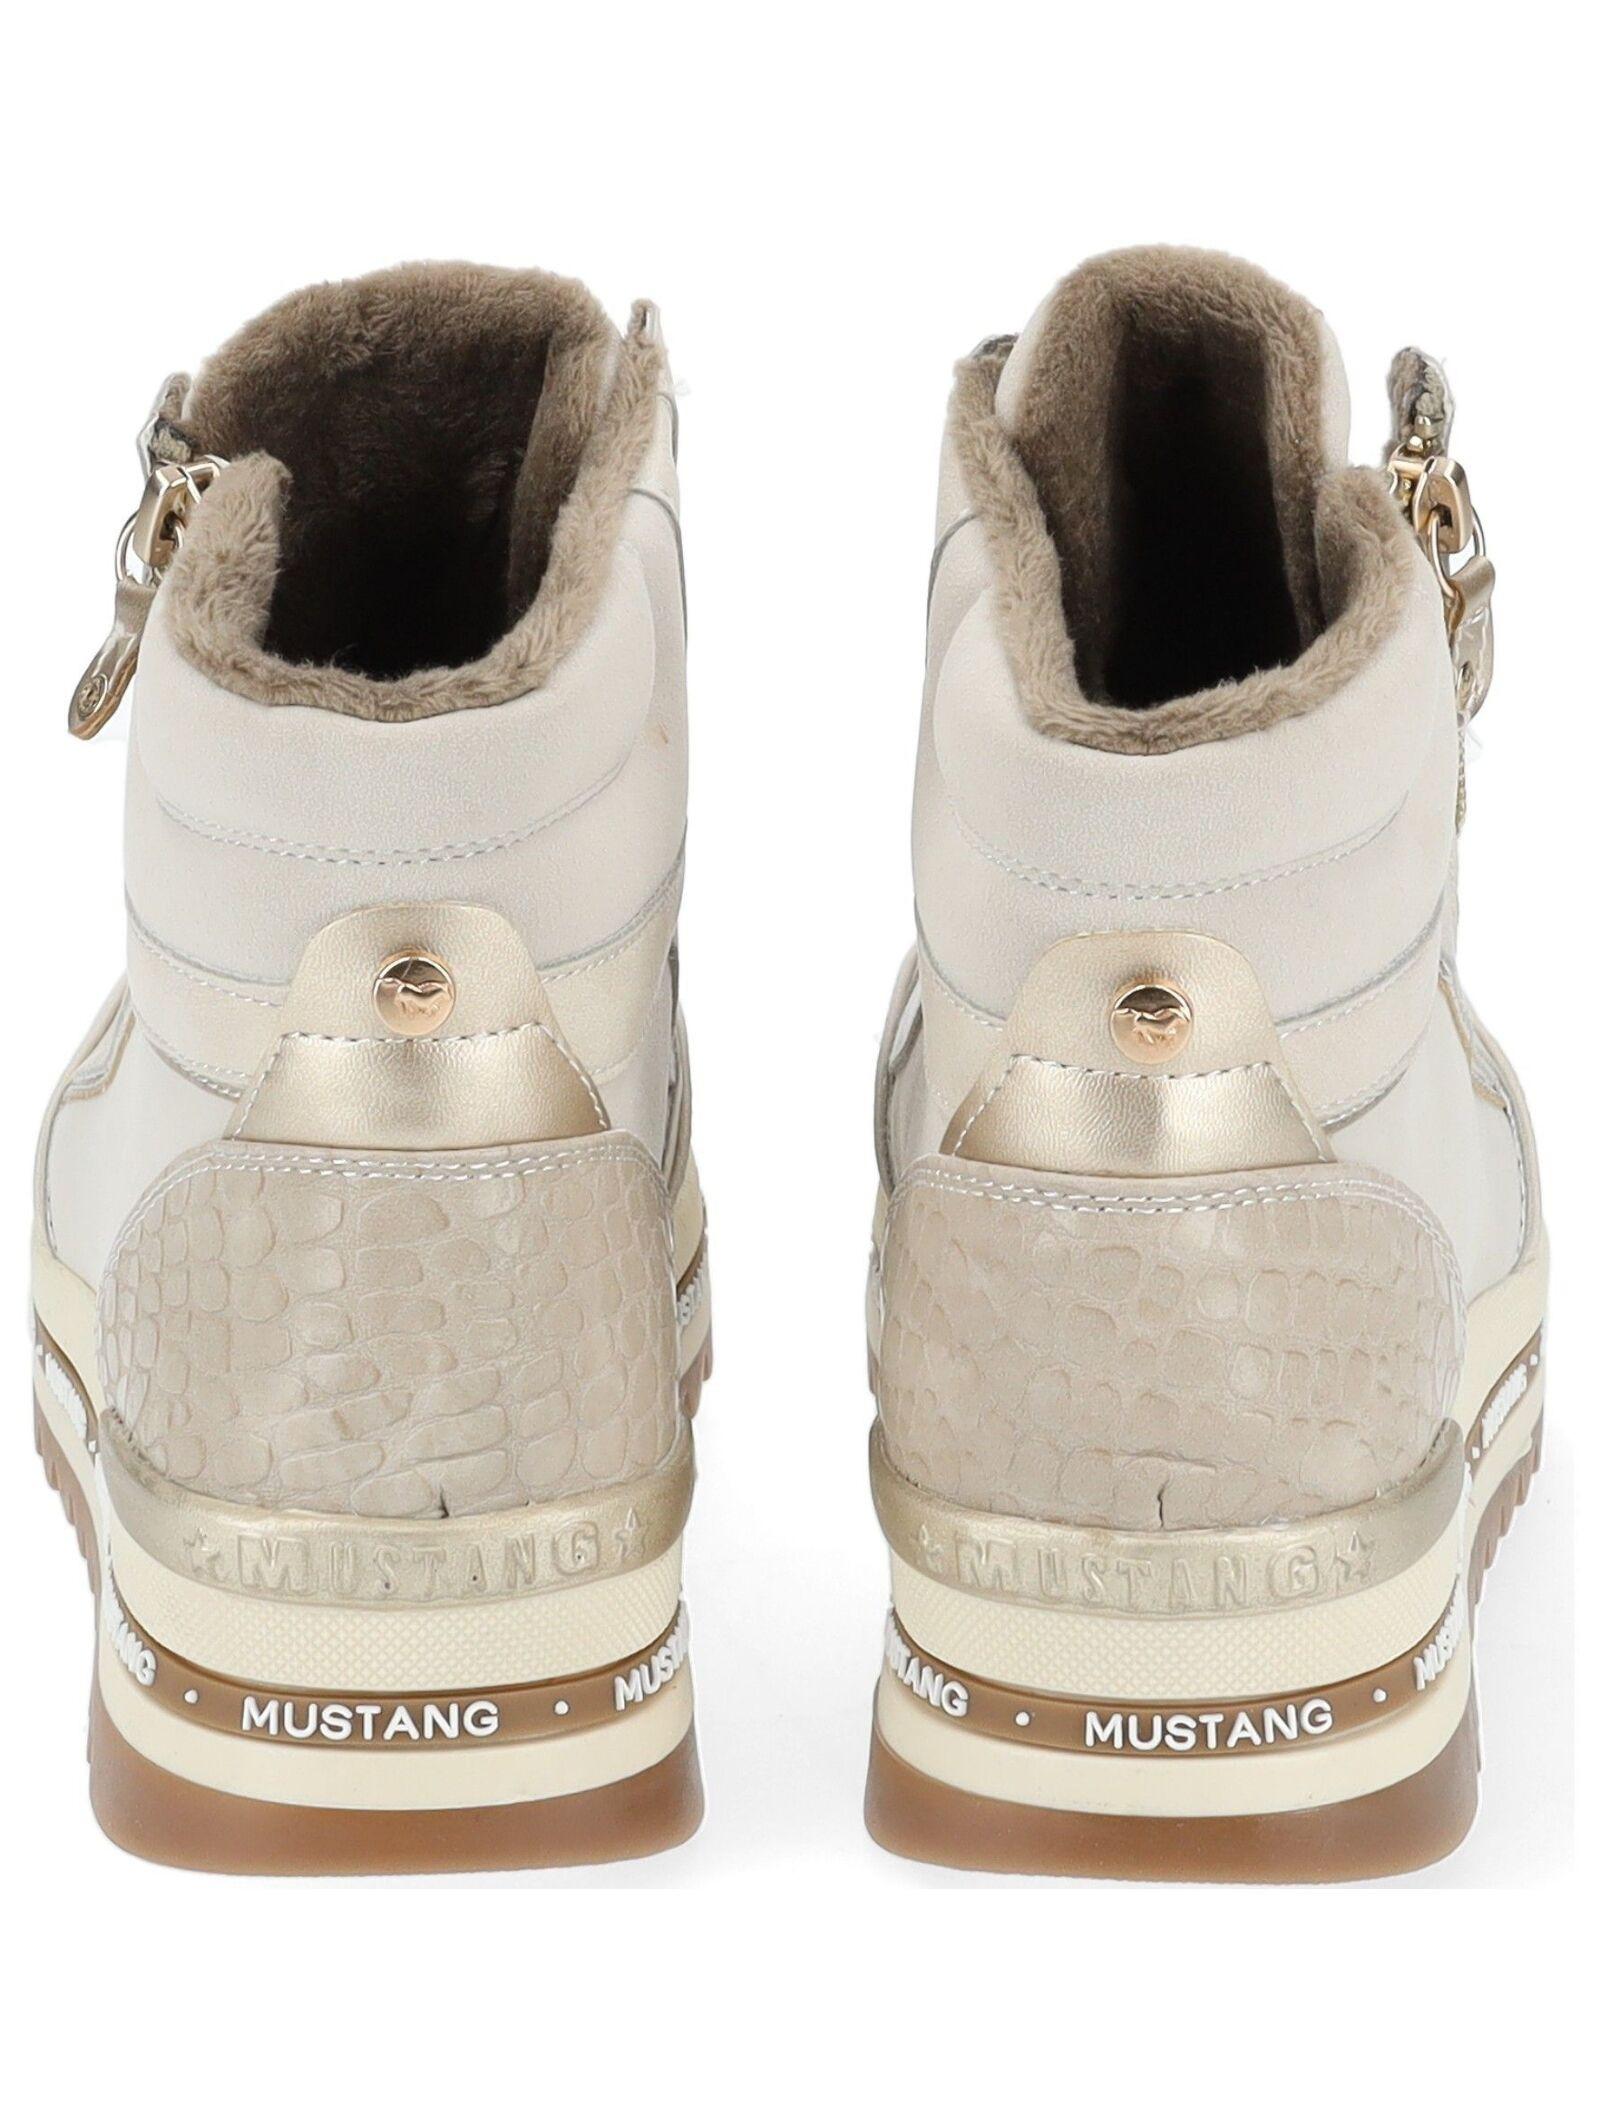 Mustang  Stiefelette 1364-504 